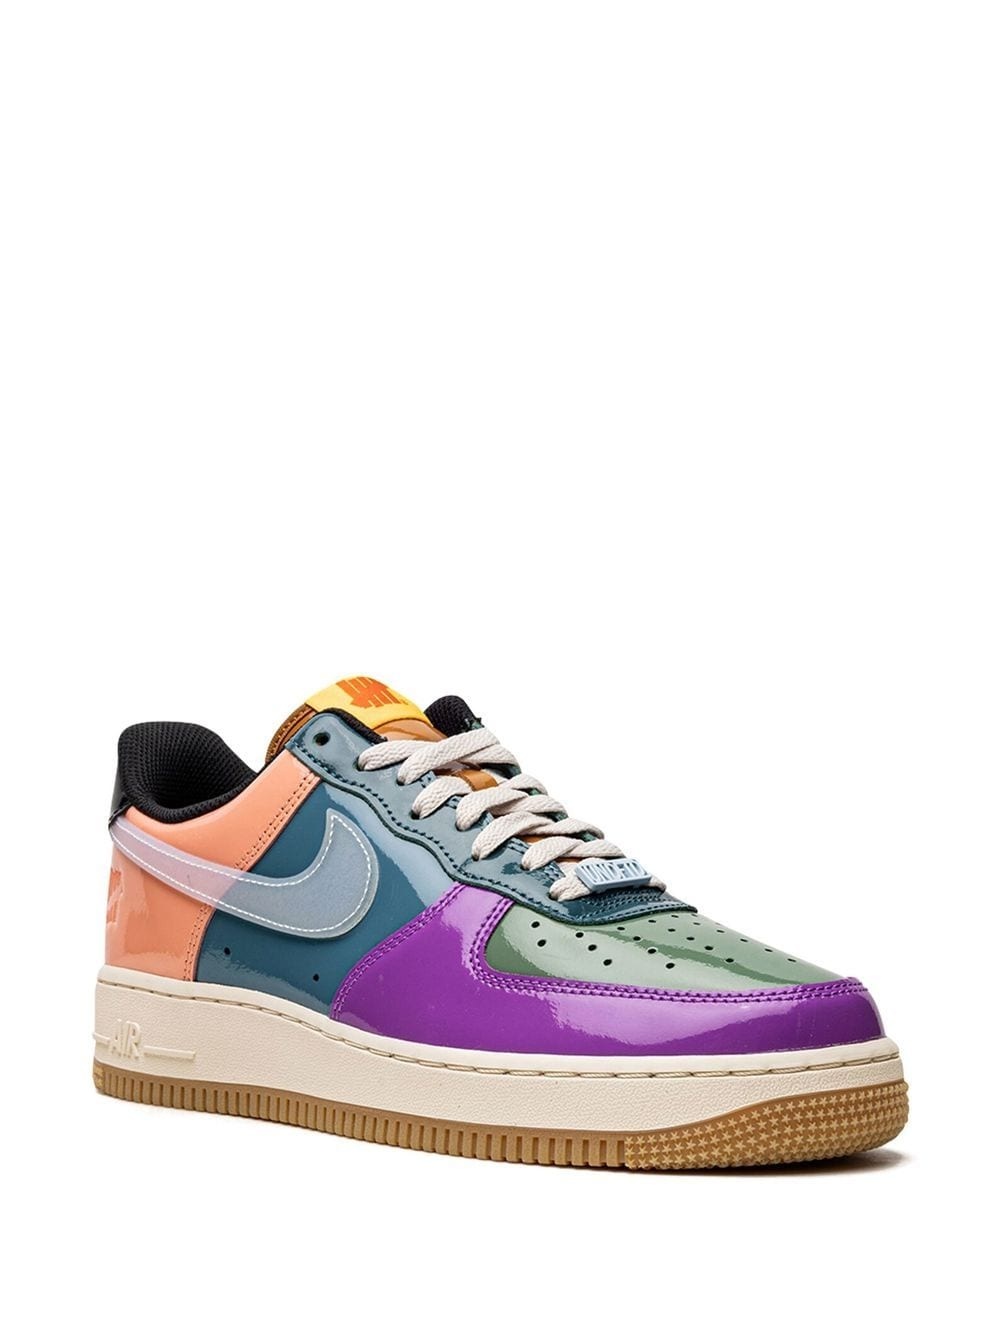 x Undefeated Air Force 1 Low "Multi-Patent" sneakers - 2